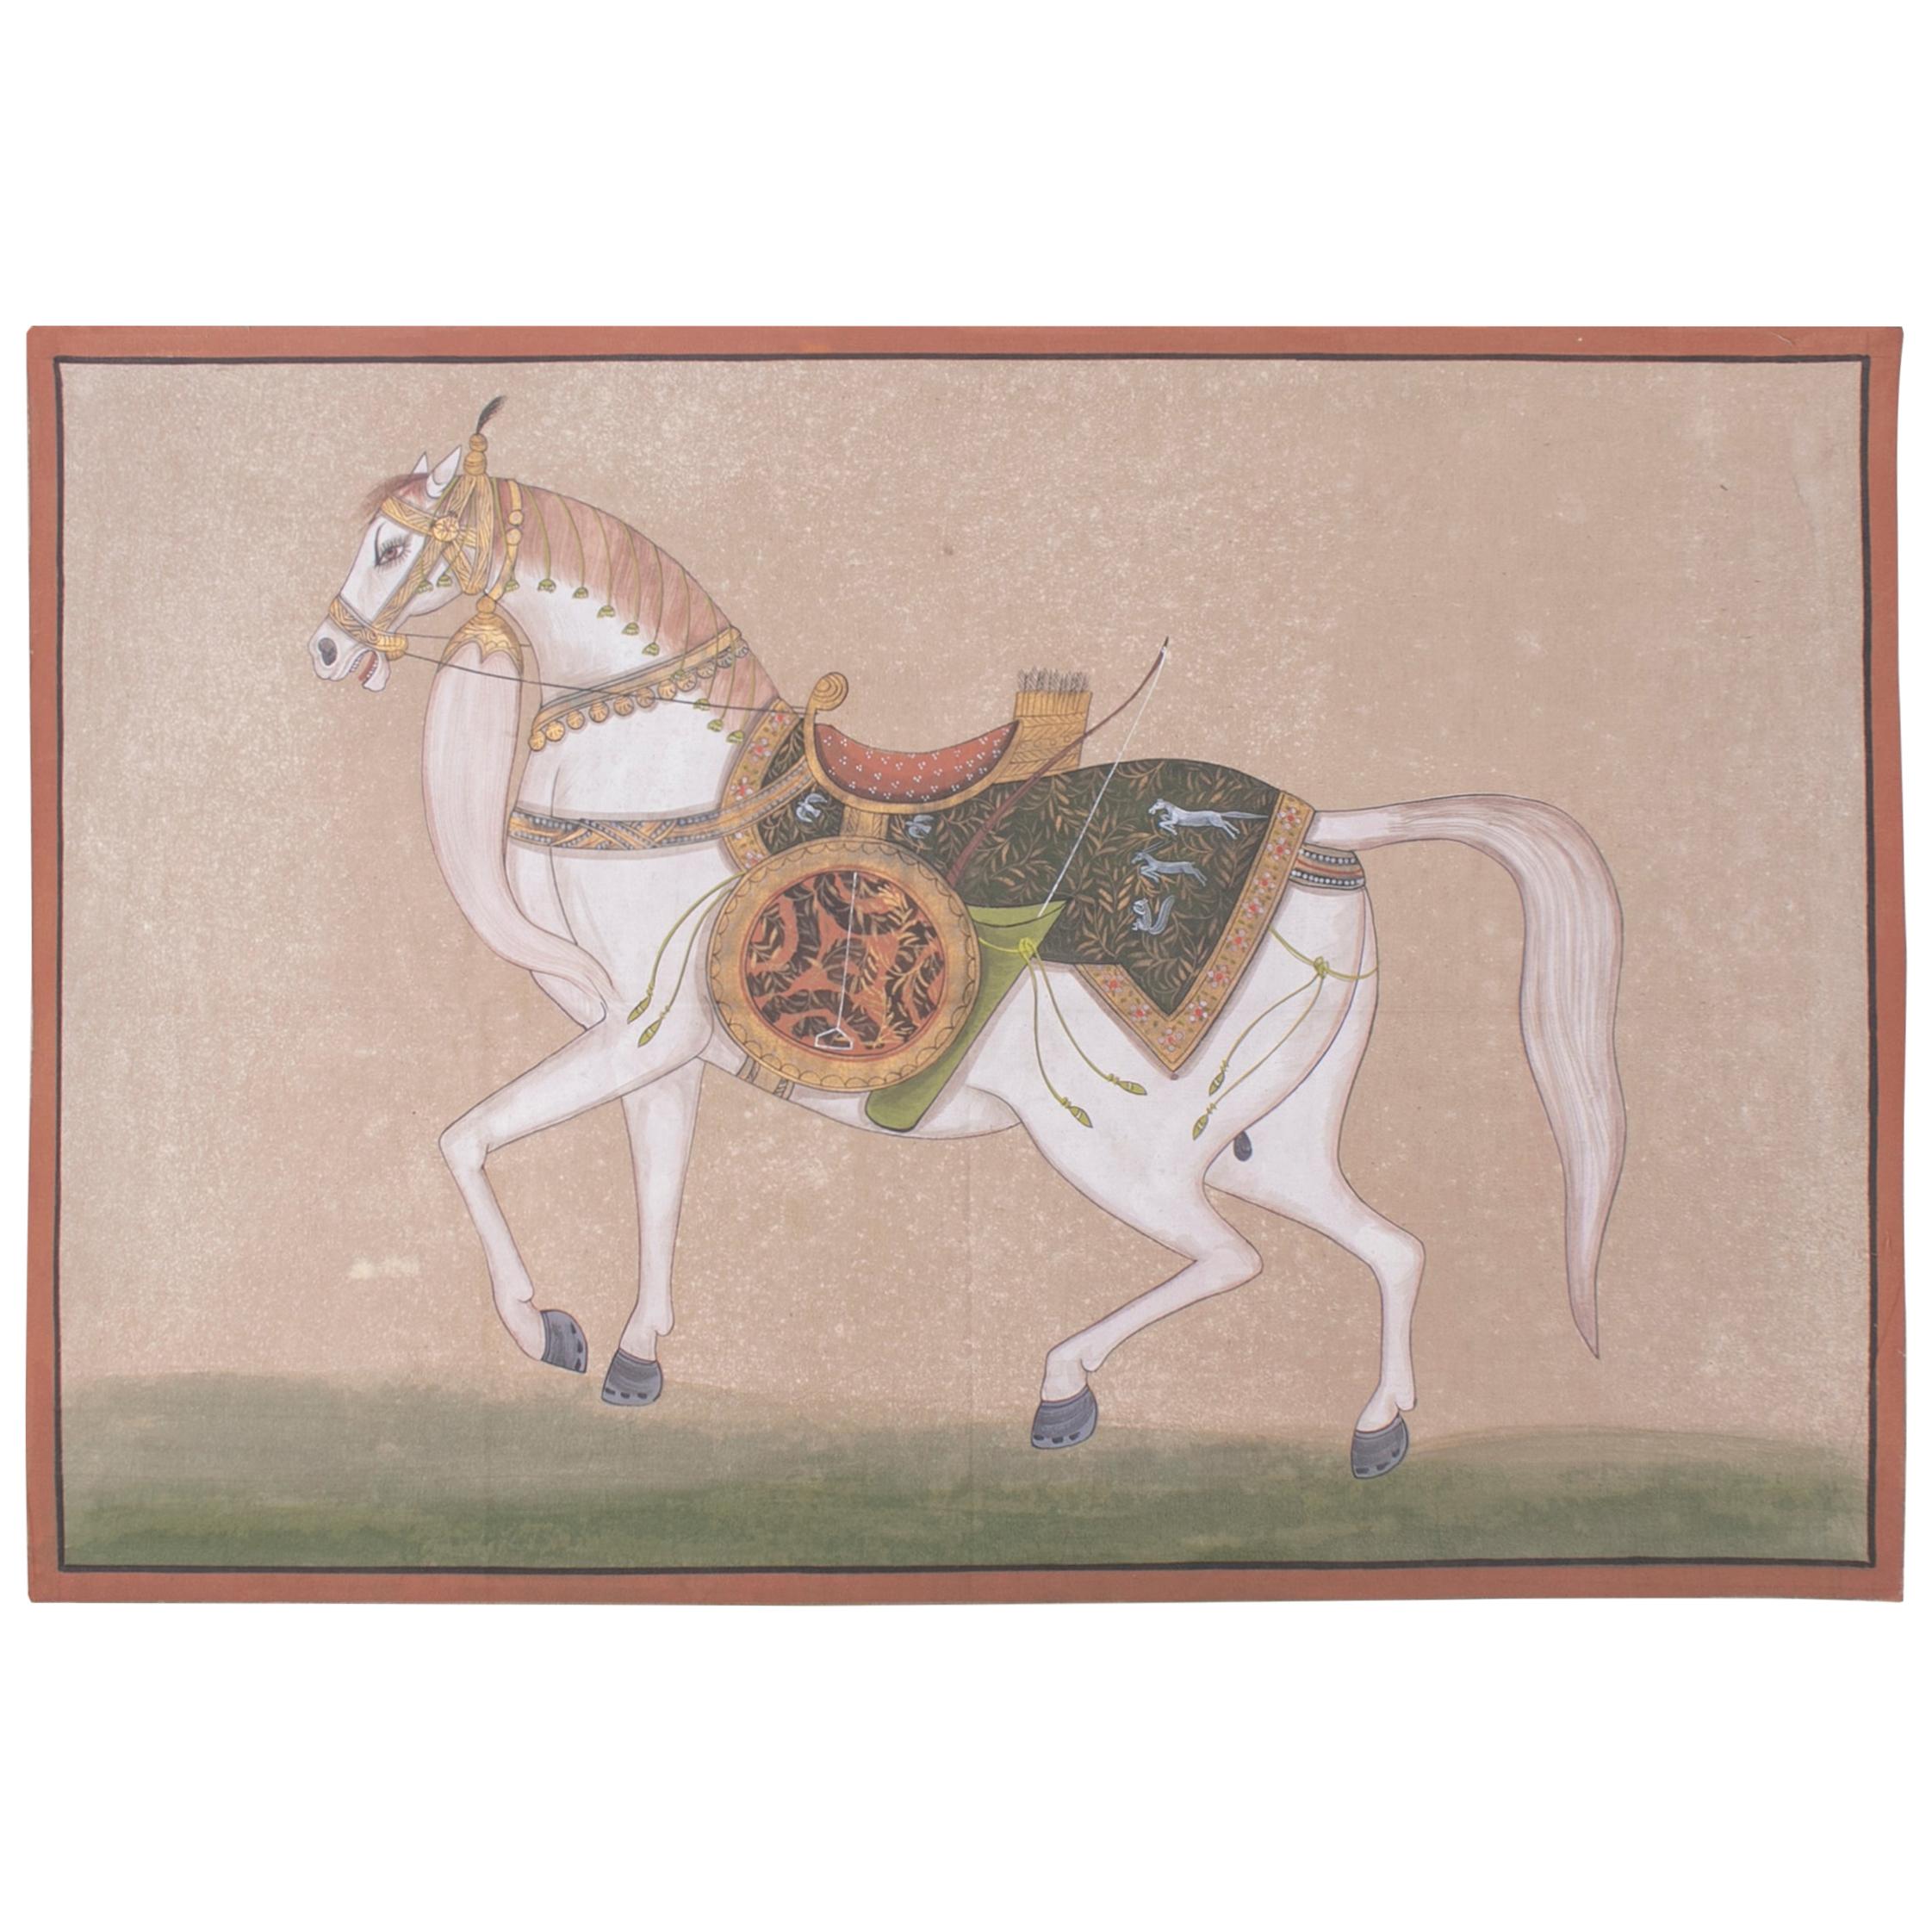 1970s Indian Painting "Walking Horse" Oil on Canvas, Jaime Parlade Design